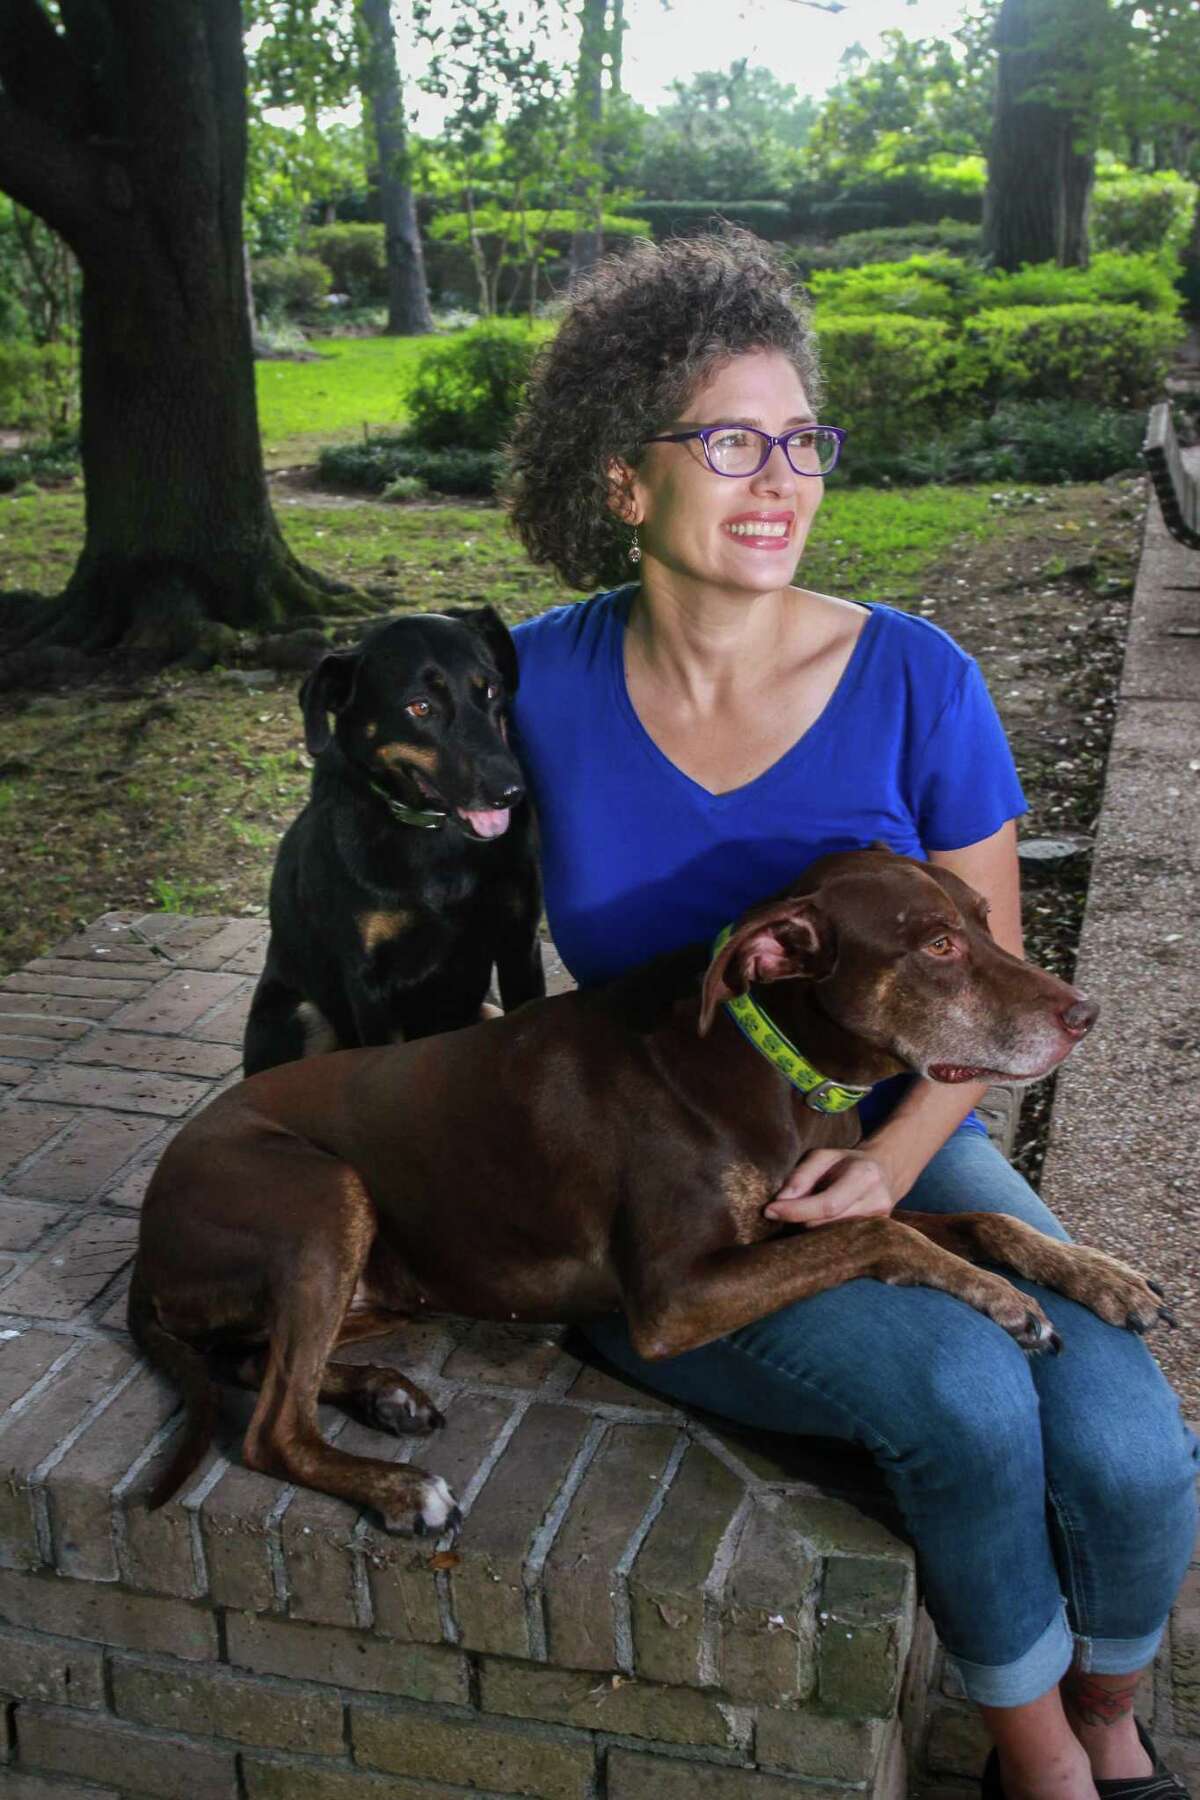 Jennifer Lopez, founder of Pupfit, an adventure exercise program for dogs, with her dogs Hazel and Xena.